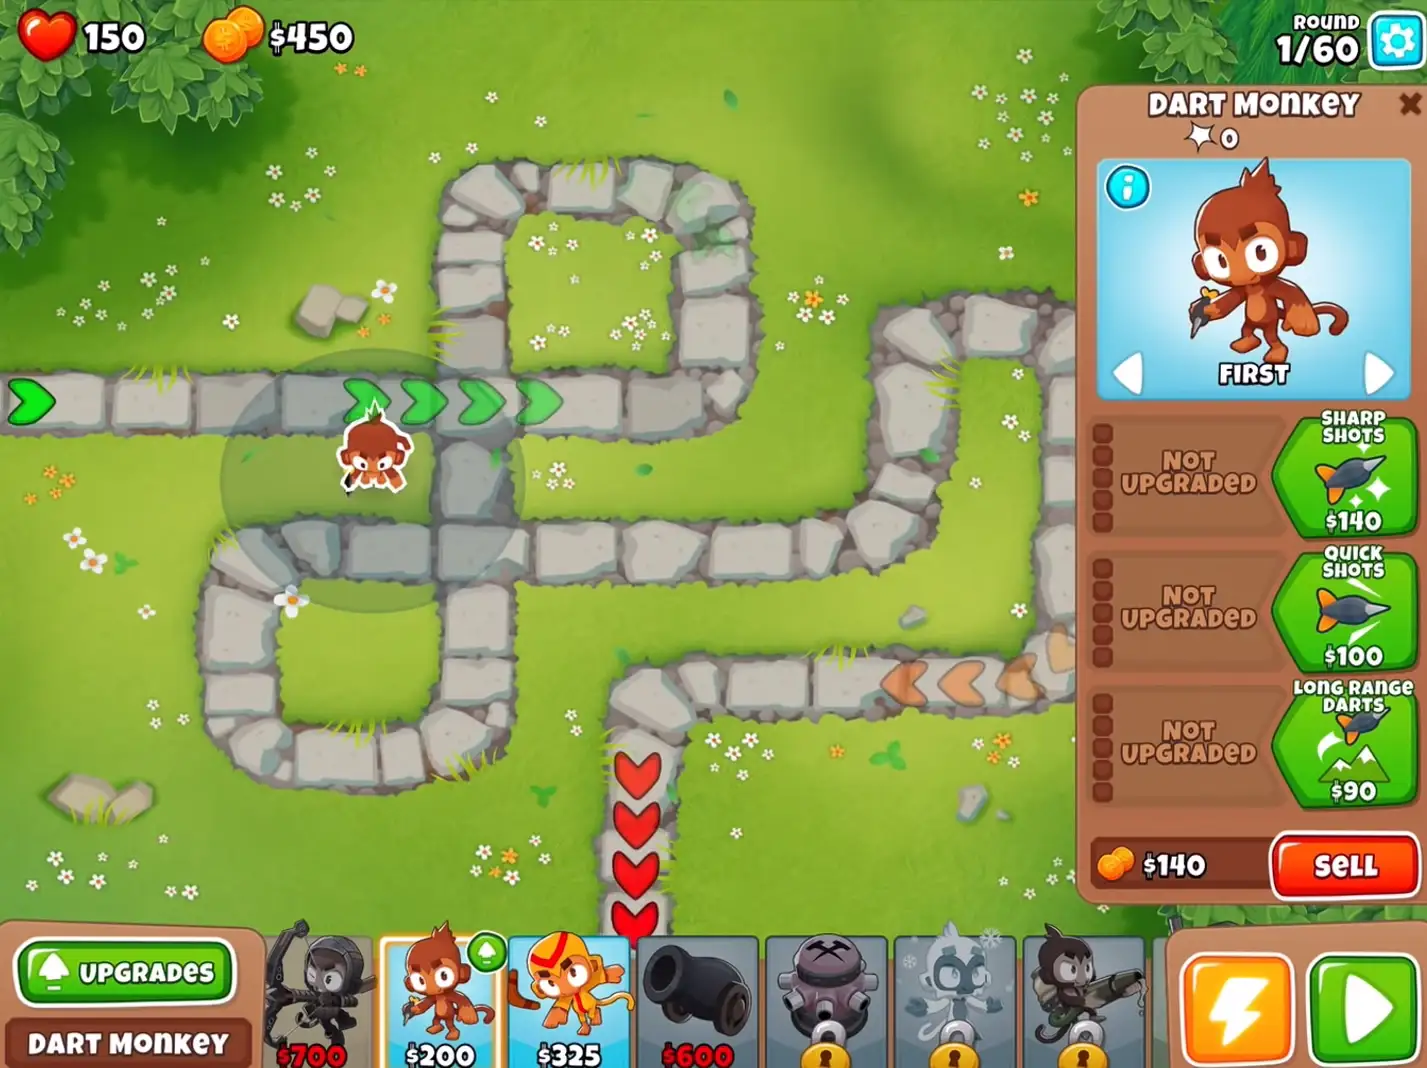 Bloons Tower Defense Gameplay